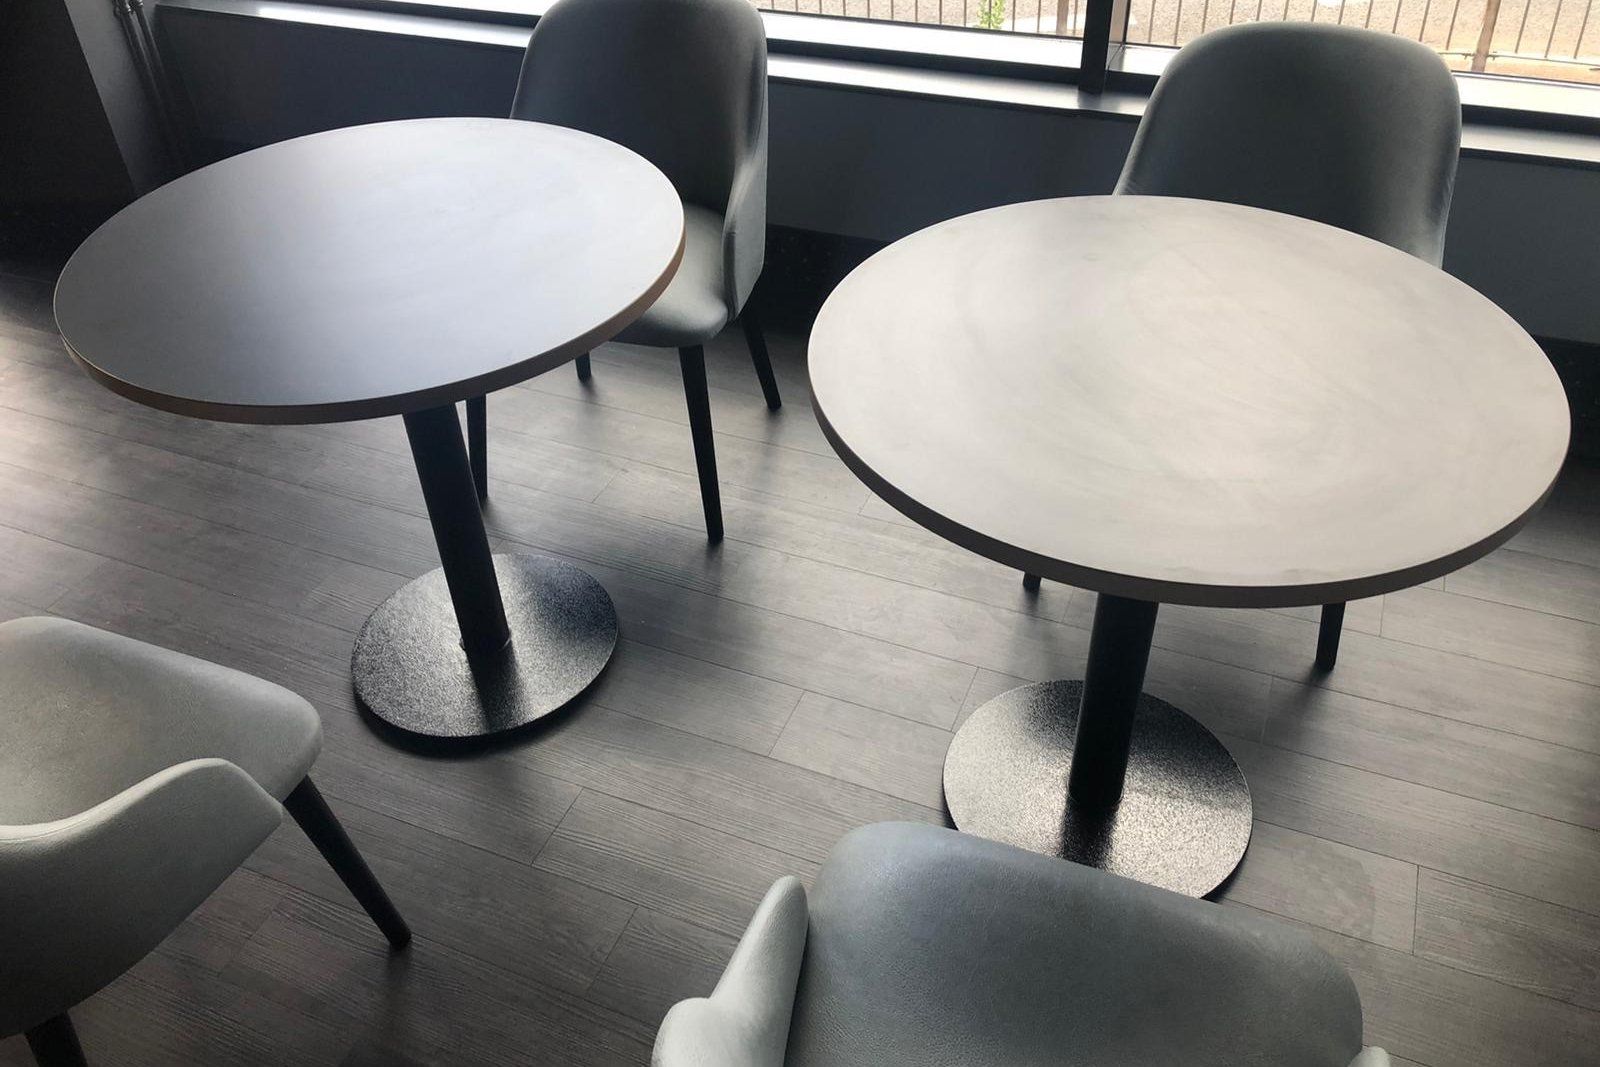 Cinema tables and chairs